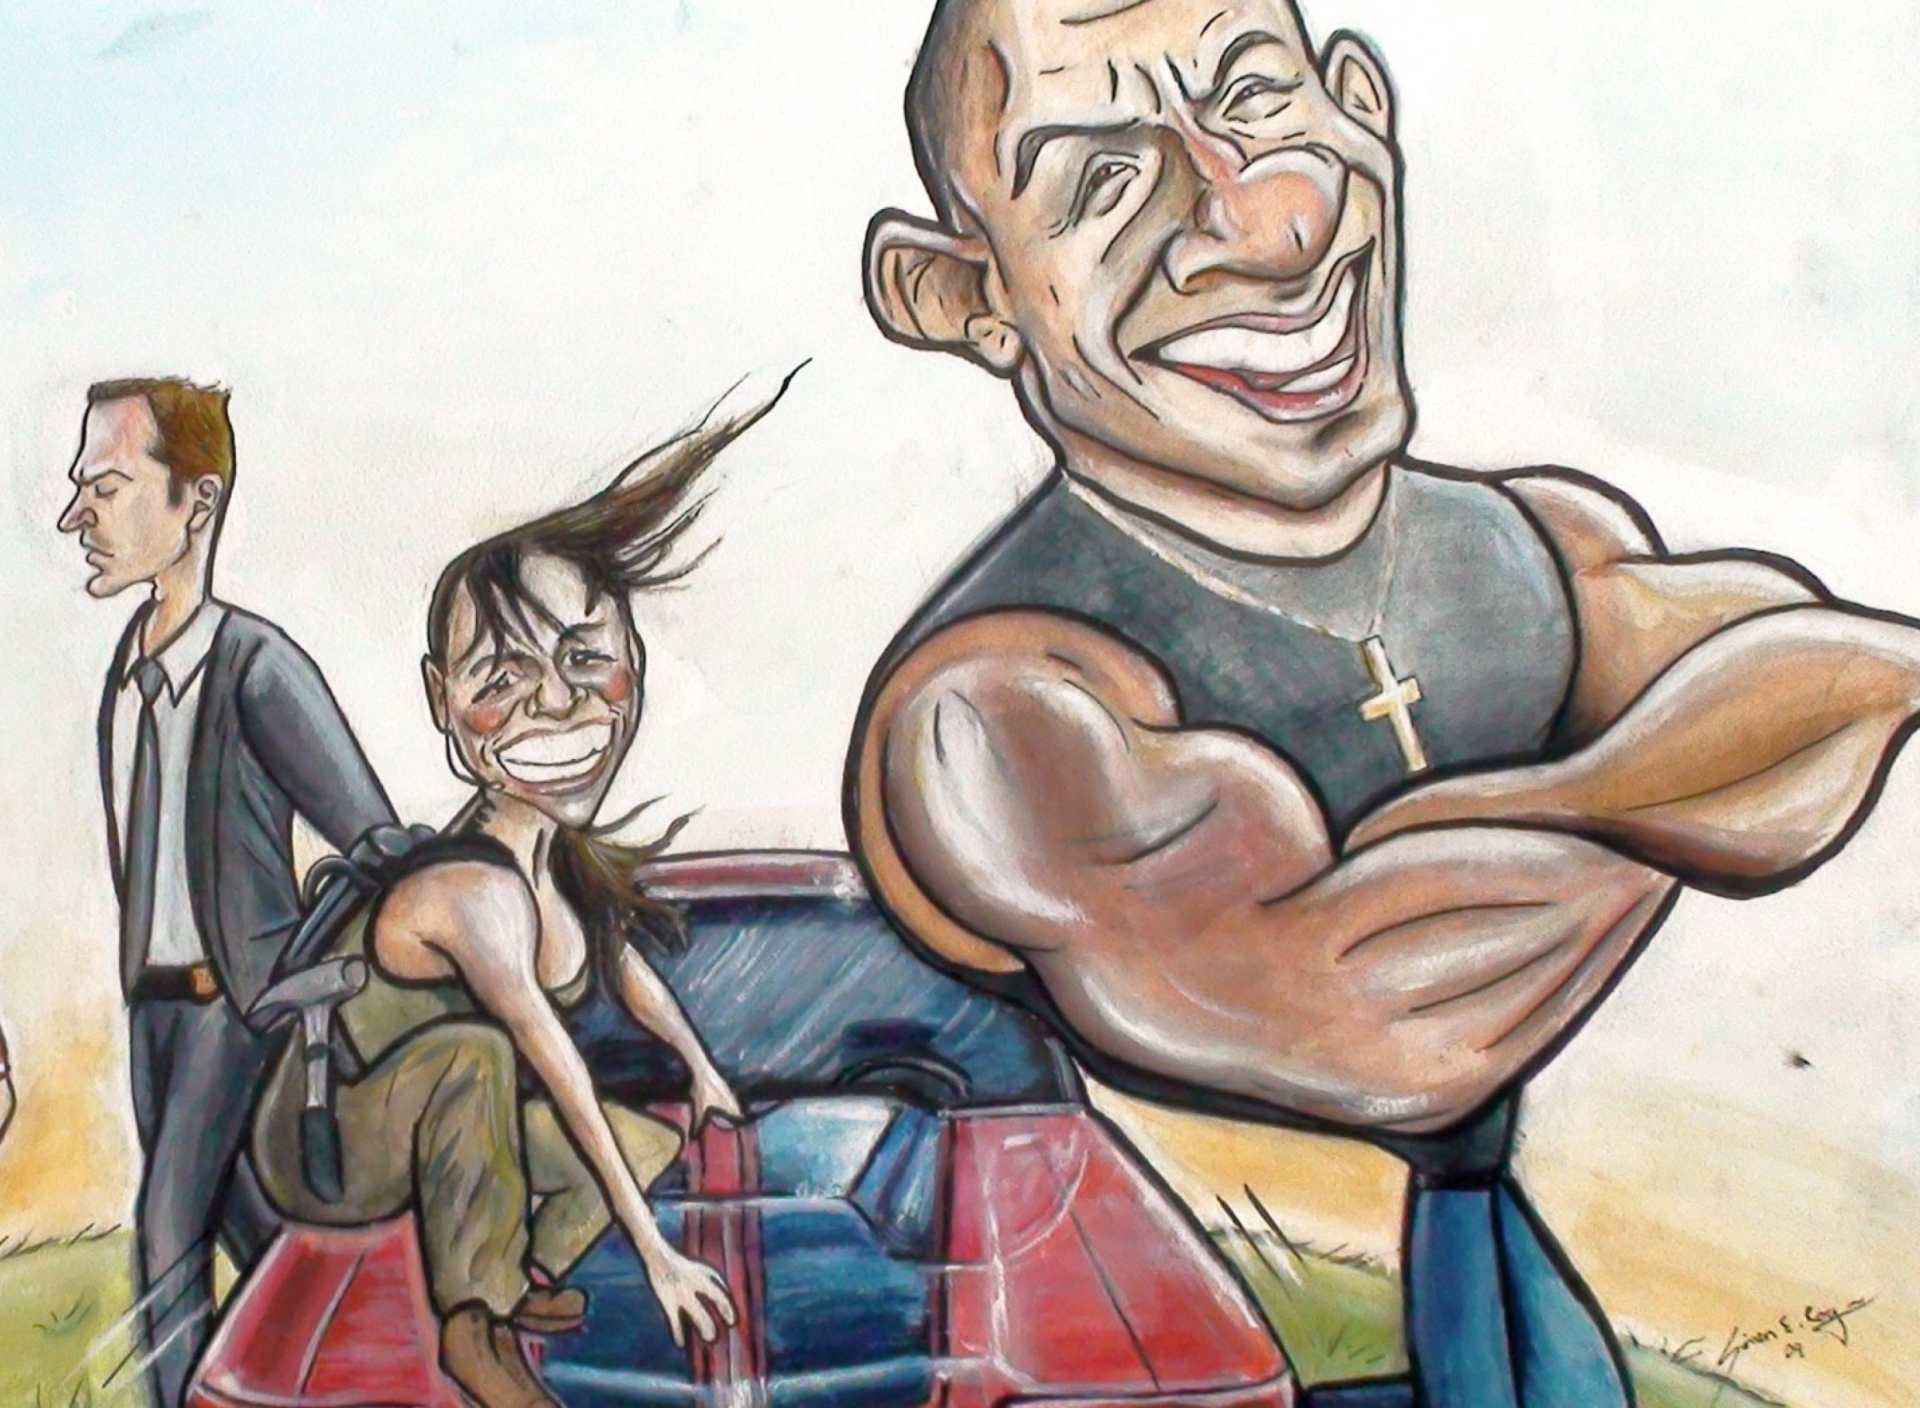 Vin Diesel Drawing - Fast And Furious wallpaper 1920x1408